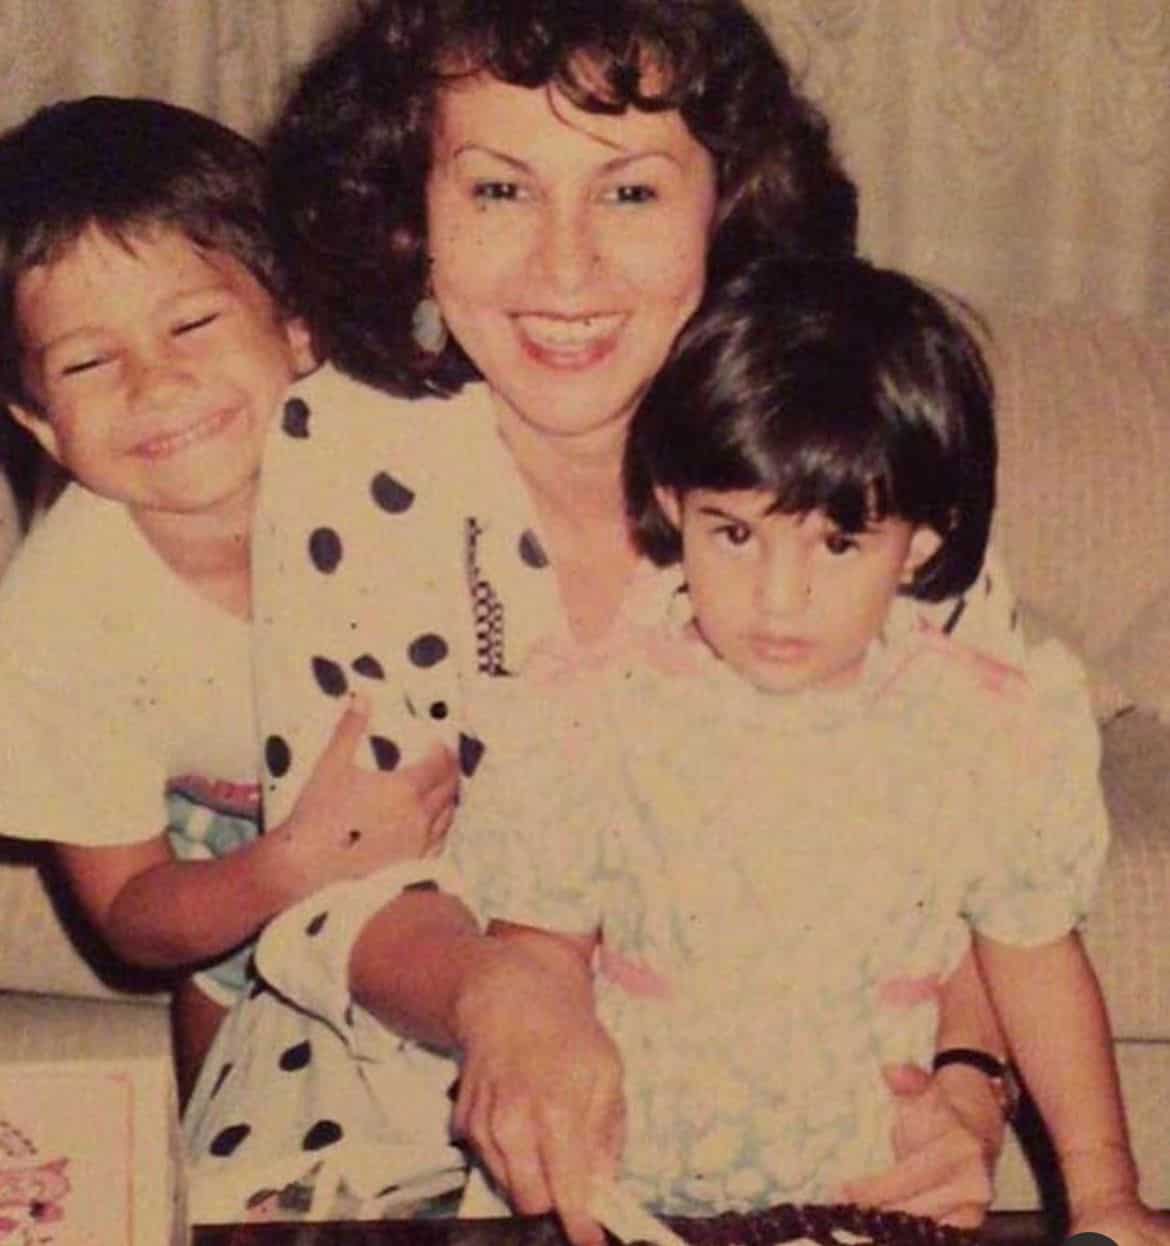 Jacqueline's childhood picture with her mom is adorable